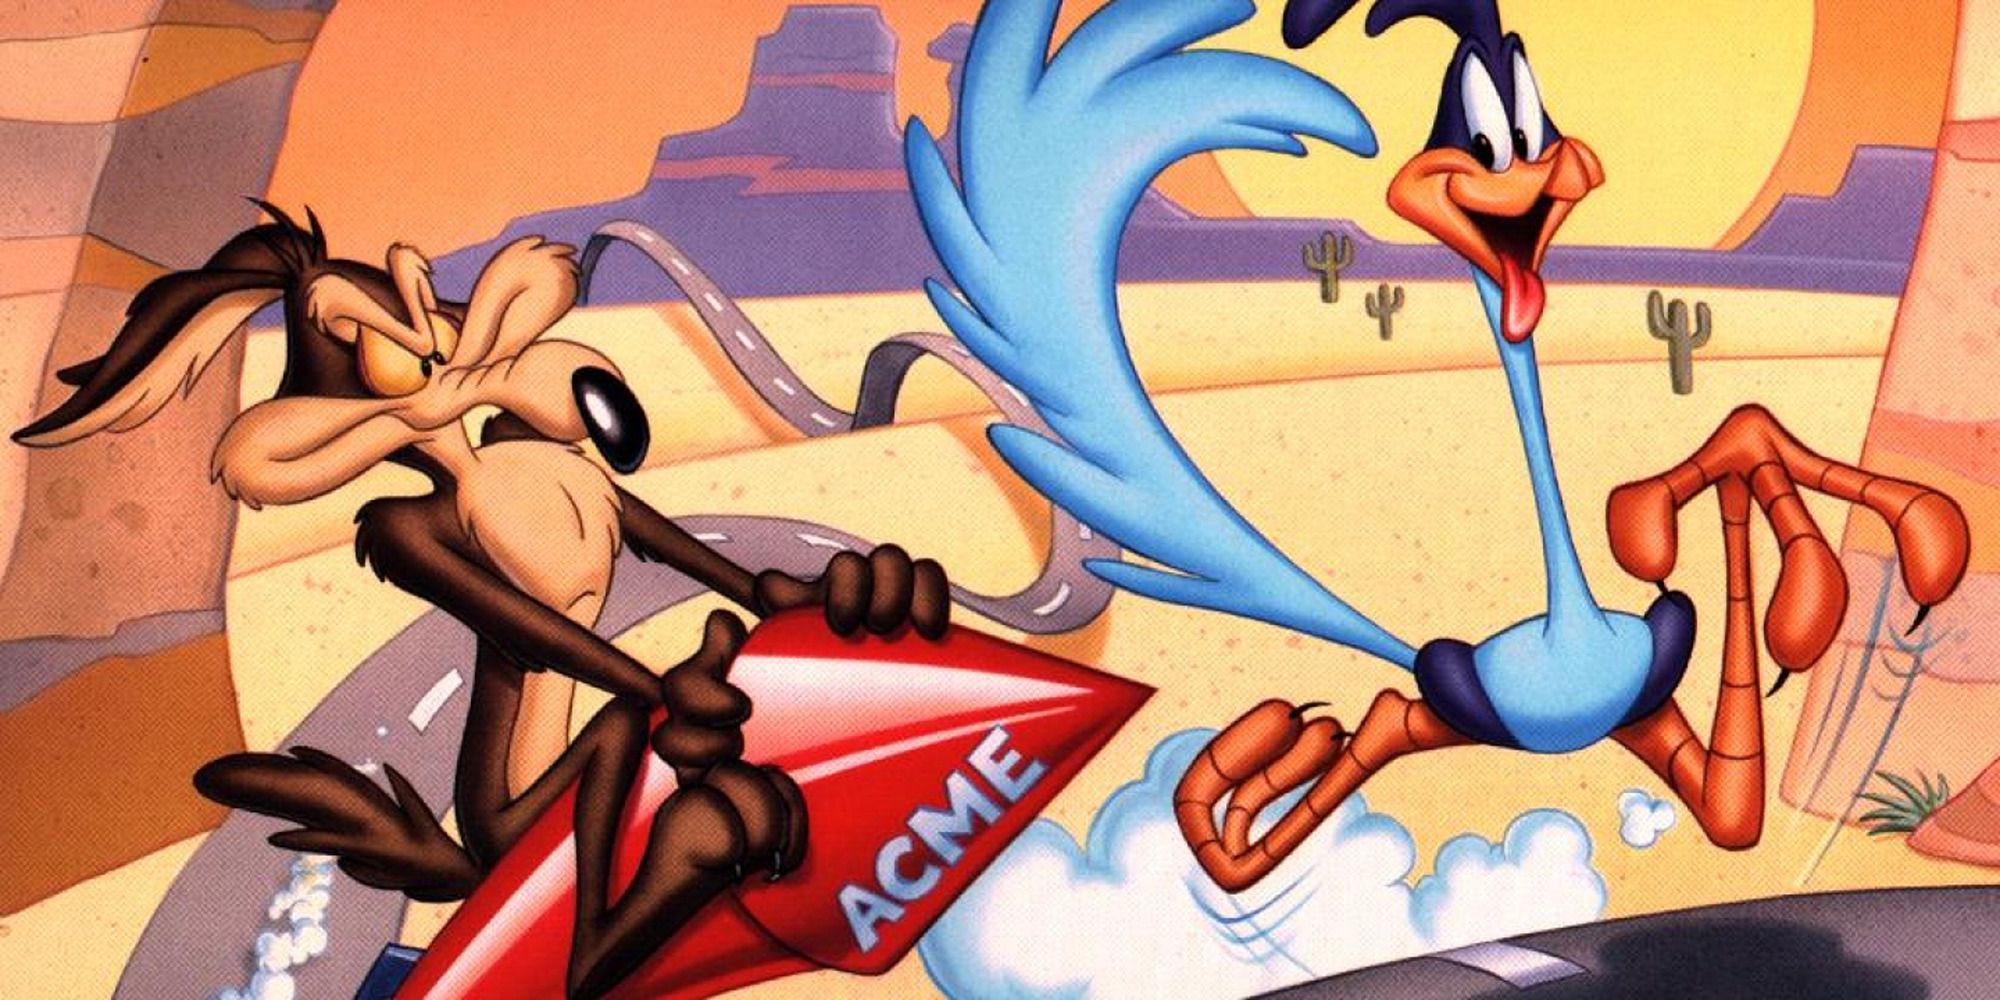 Wile E Coyote chasing the Road Runner atop an ACME rocket